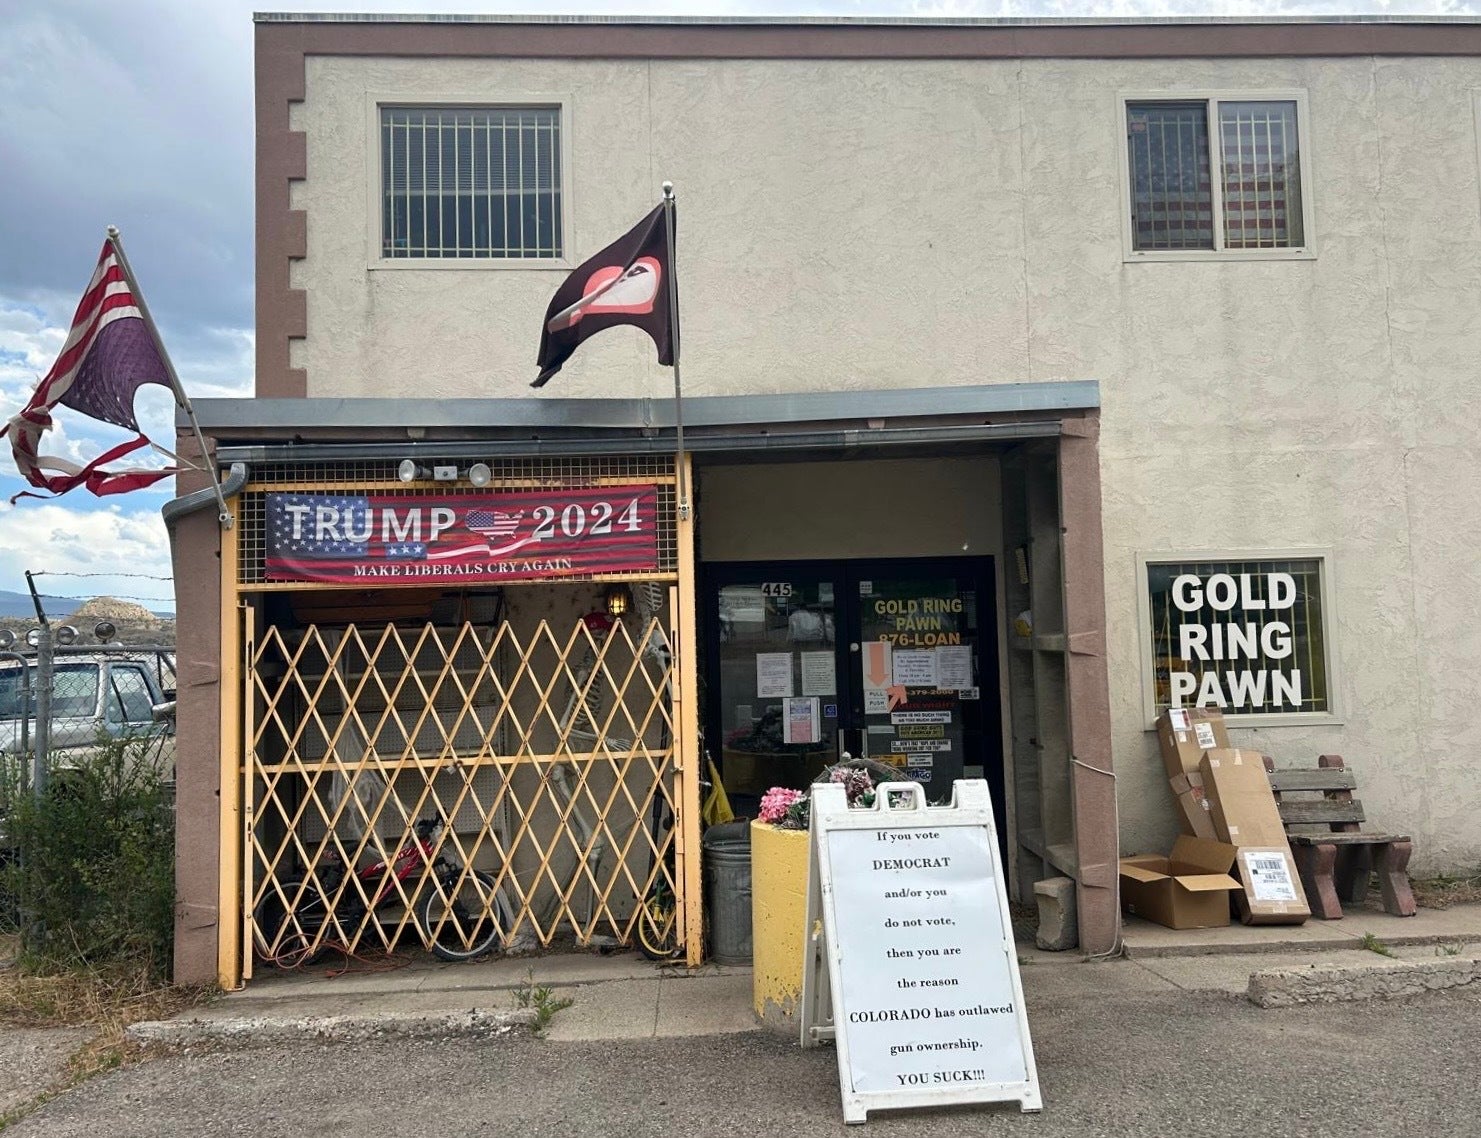 Outside of Garfield County Republican Doug Wight’s pawn shop in Stilt, Colorado sits a sign aimed at local Democrats and those who don’t vote